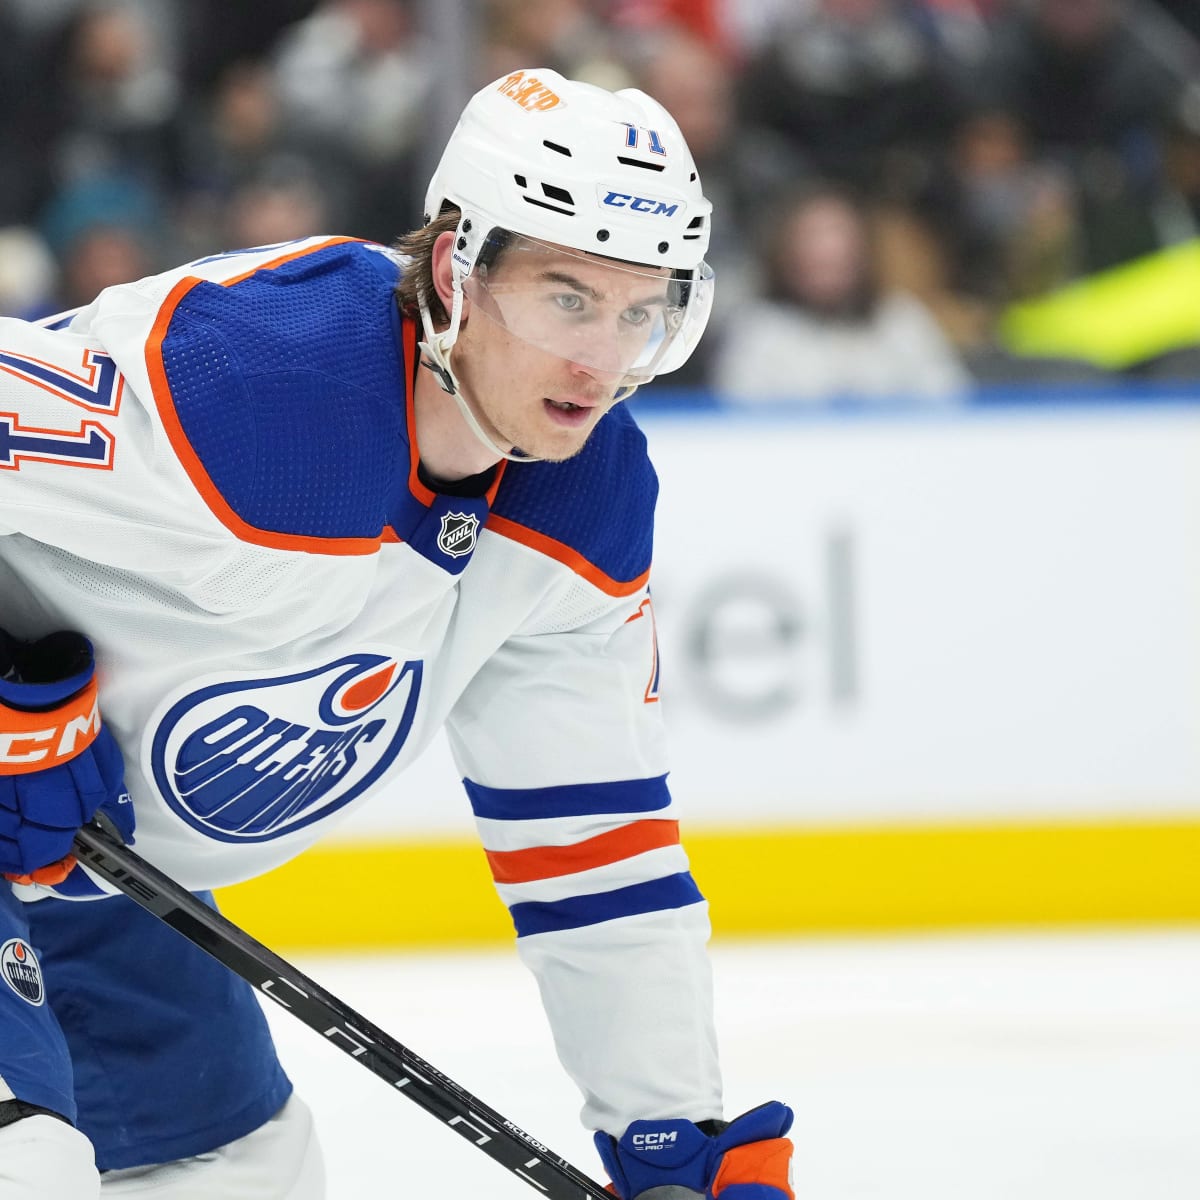 Oilers give forward McLeod a two-year extension